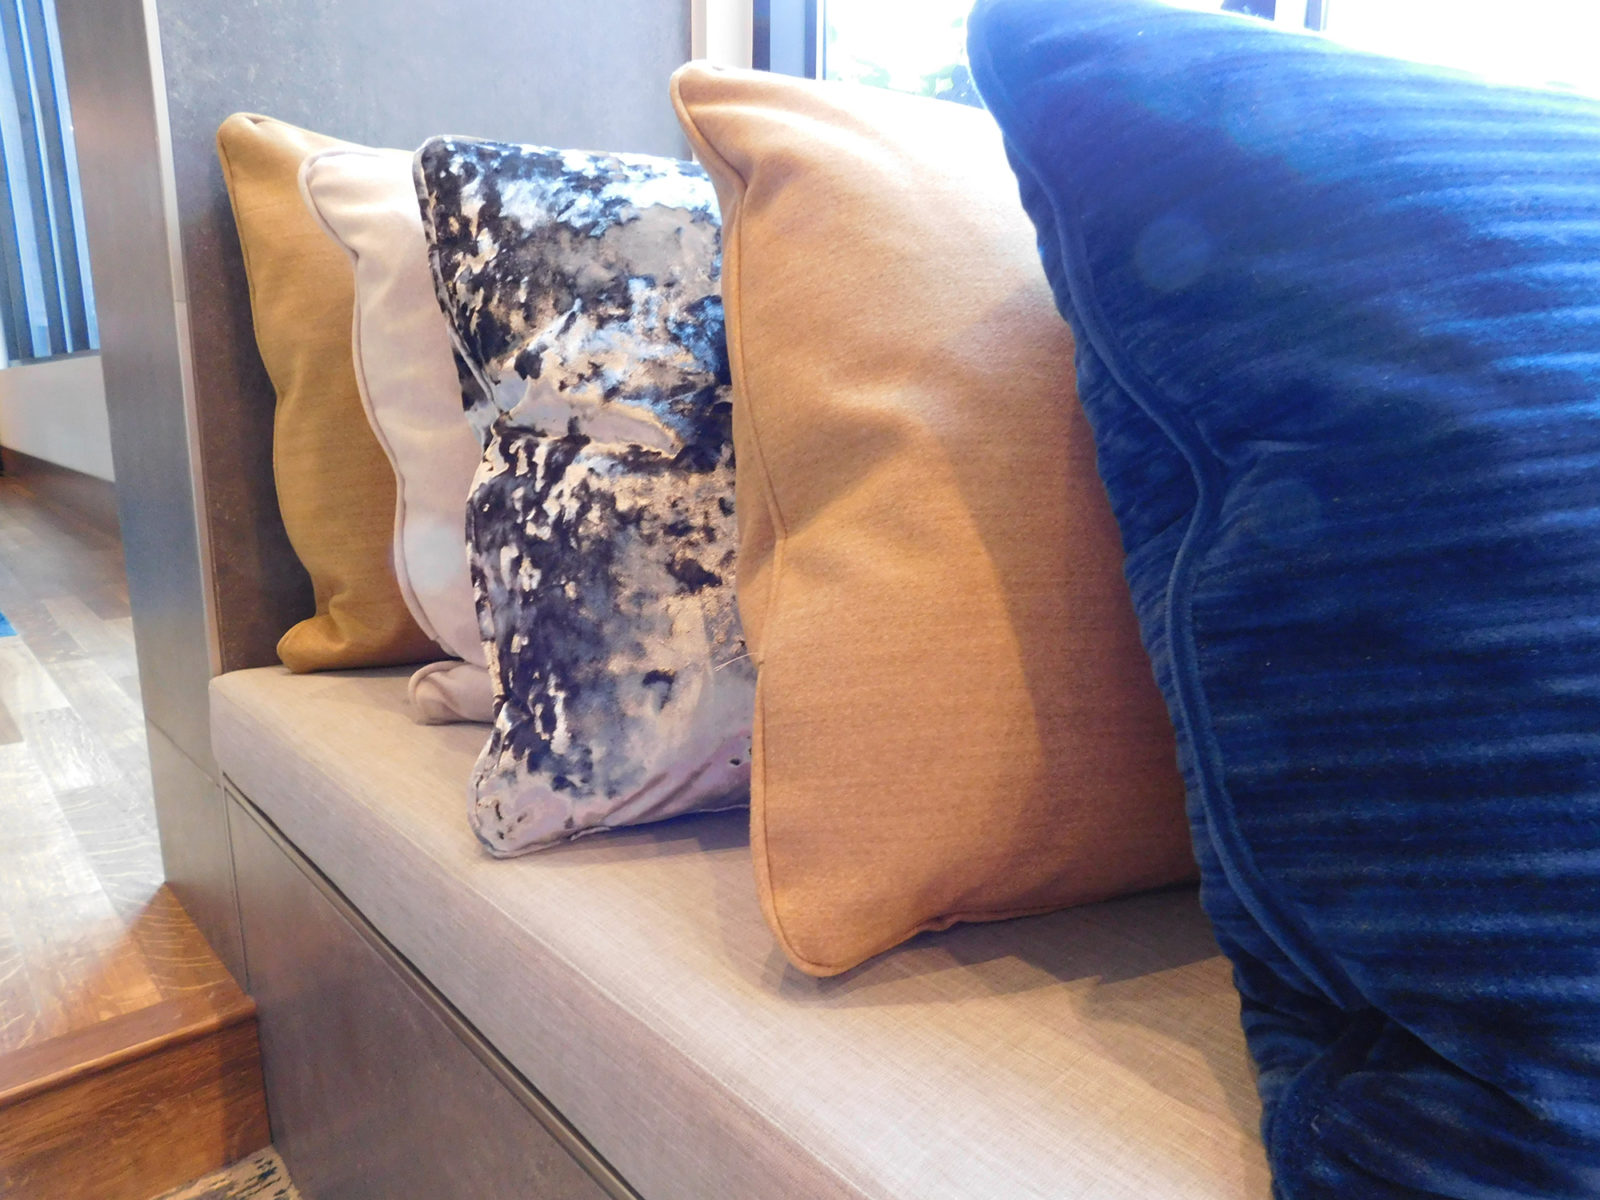 Detail image of a row of pillows lined up on a bench. The pillows are a combination of blue, white and tan colors.